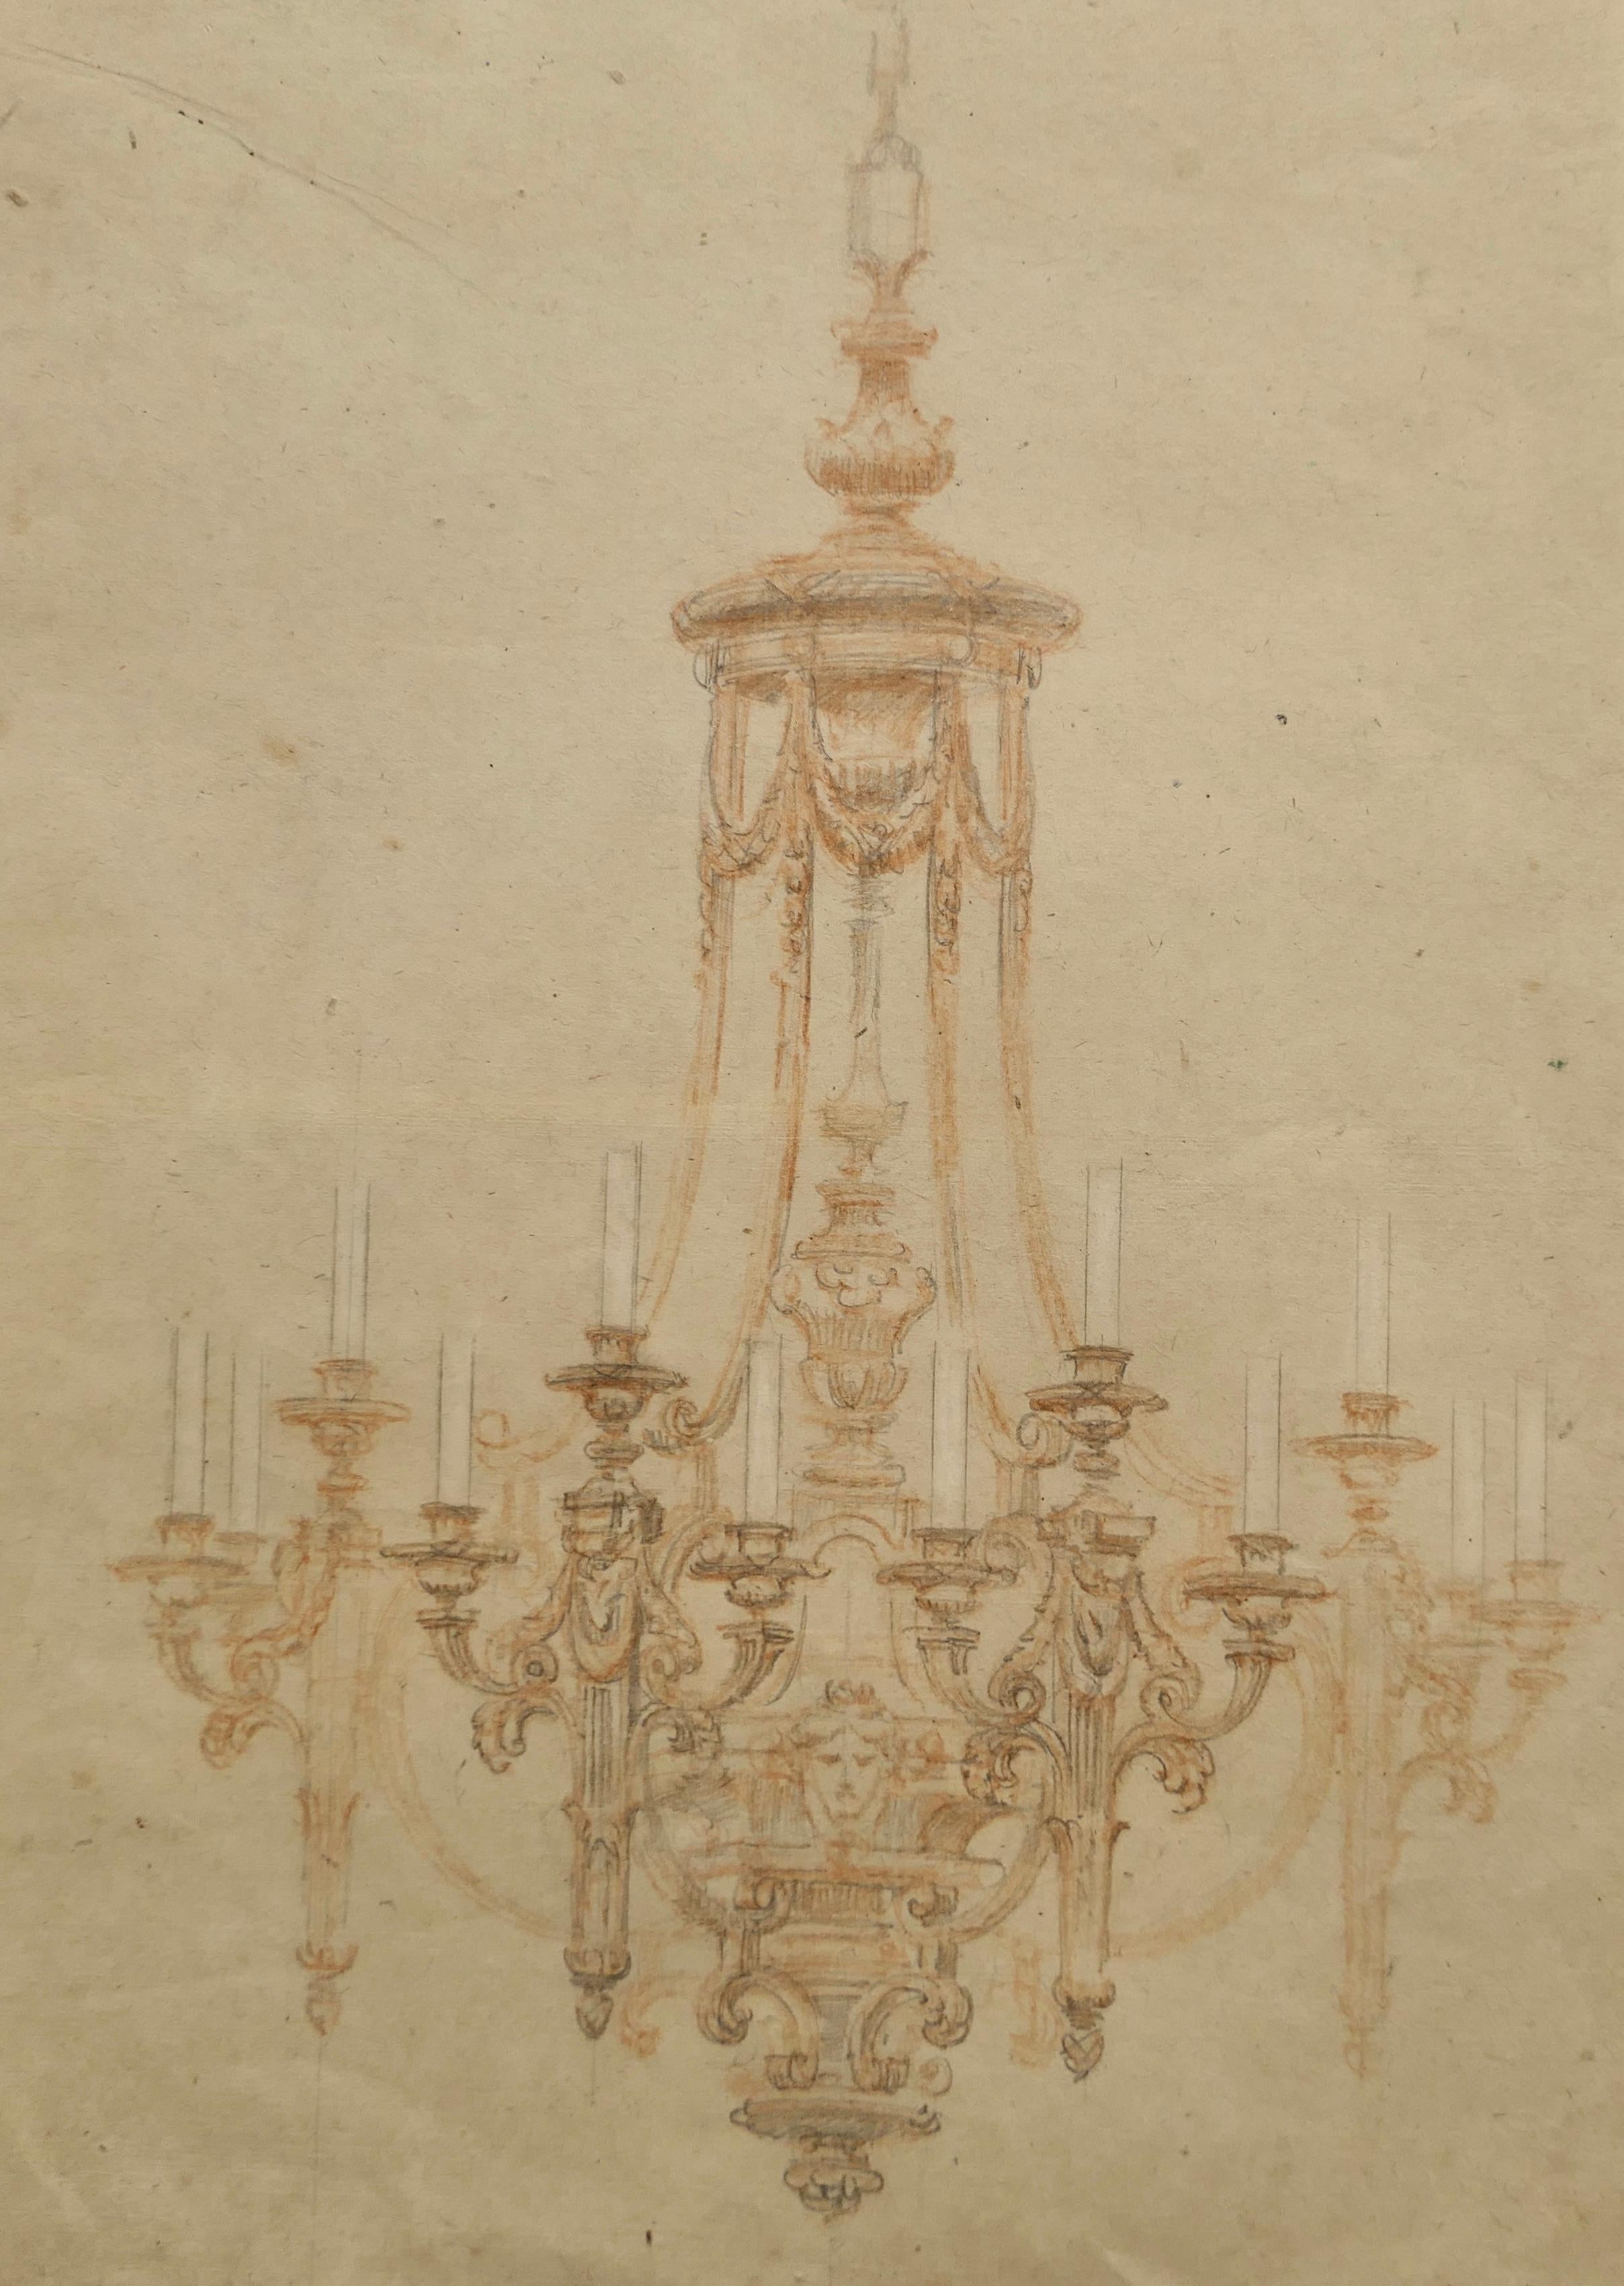 Multi Branch Arts and Crafts chandelier Illustration attributed to Amor Fenn

Illustration of a multi branch Chandelier attributed to Amor Fenn. 
This detailed drawing turned up in a collection of illustrations reputed to have come from the metal